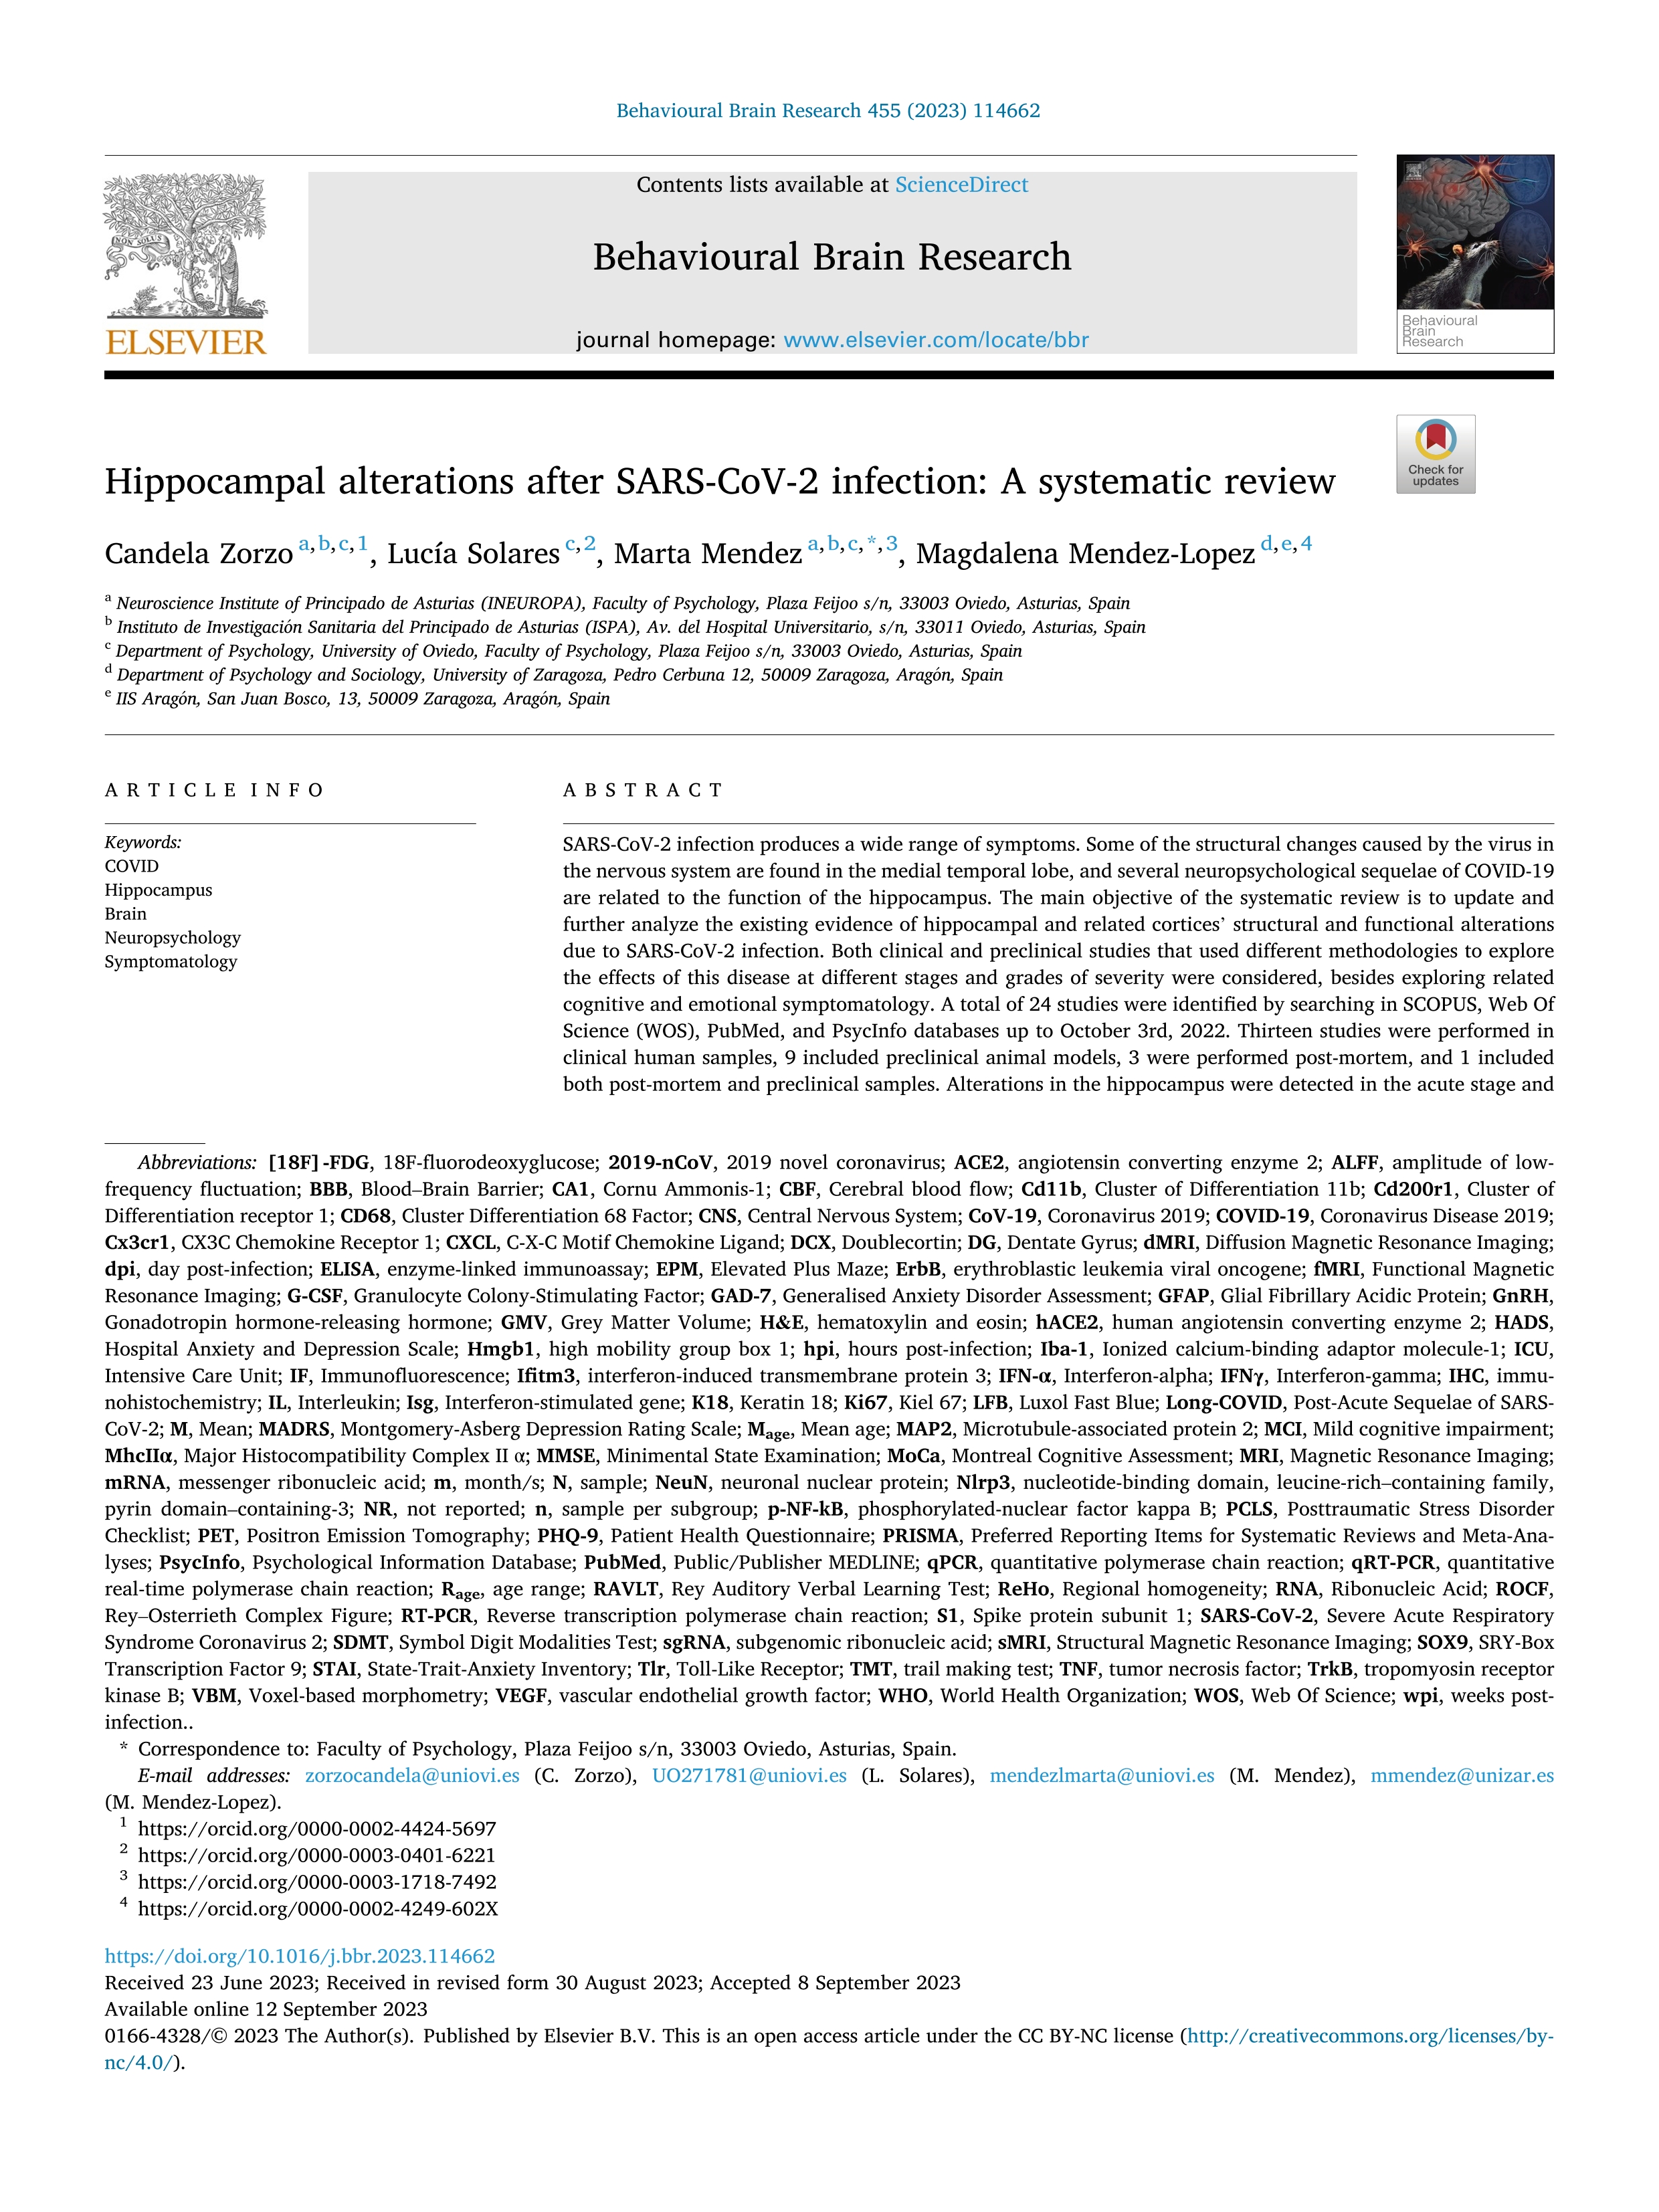 Hippocampal alterations after SARS-CoV-2 infection: a systematic review